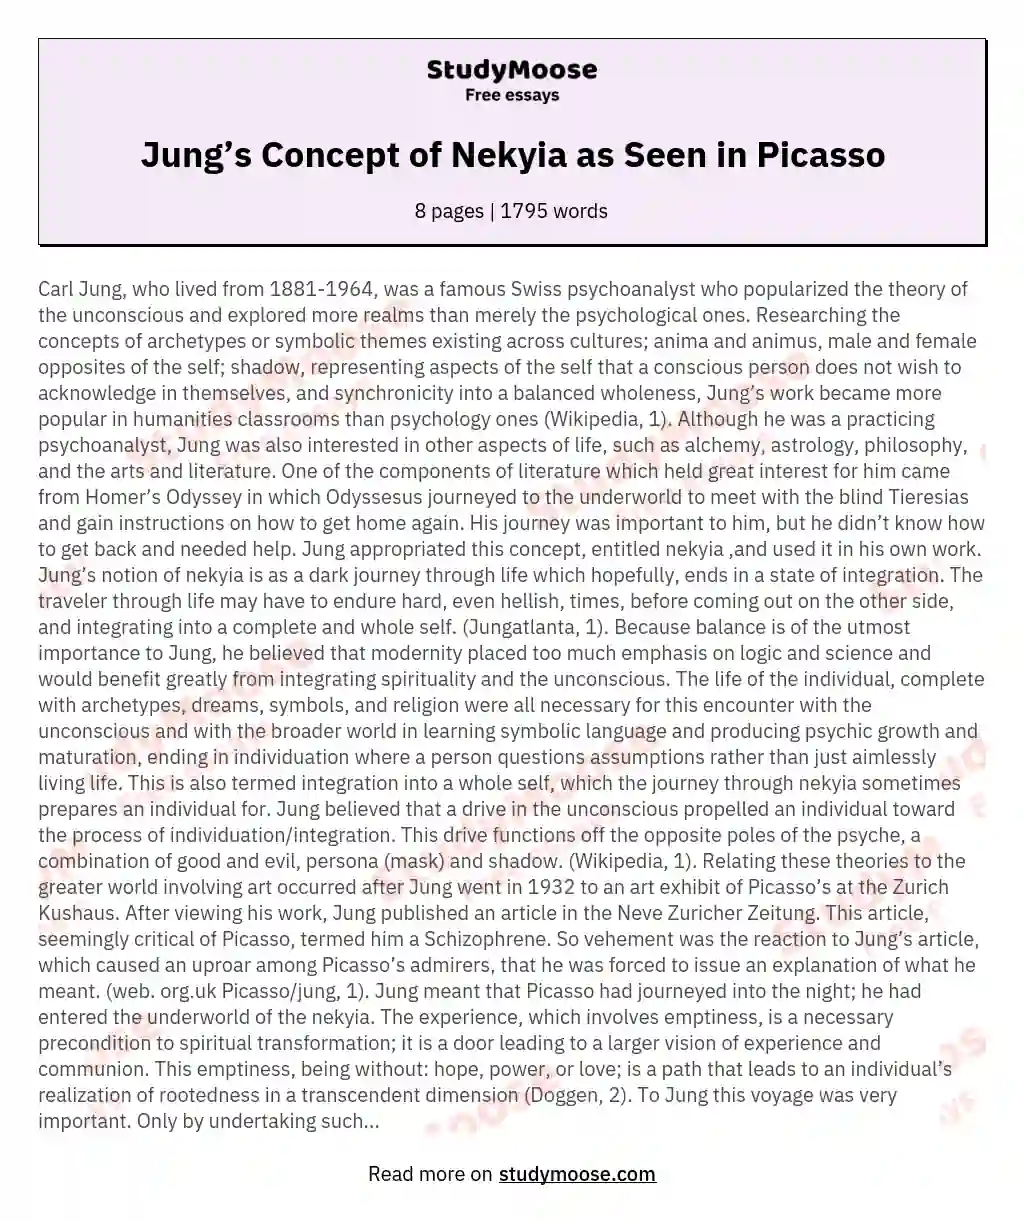 Jung’s Concept of Nekyia as Seen in Picasso essay